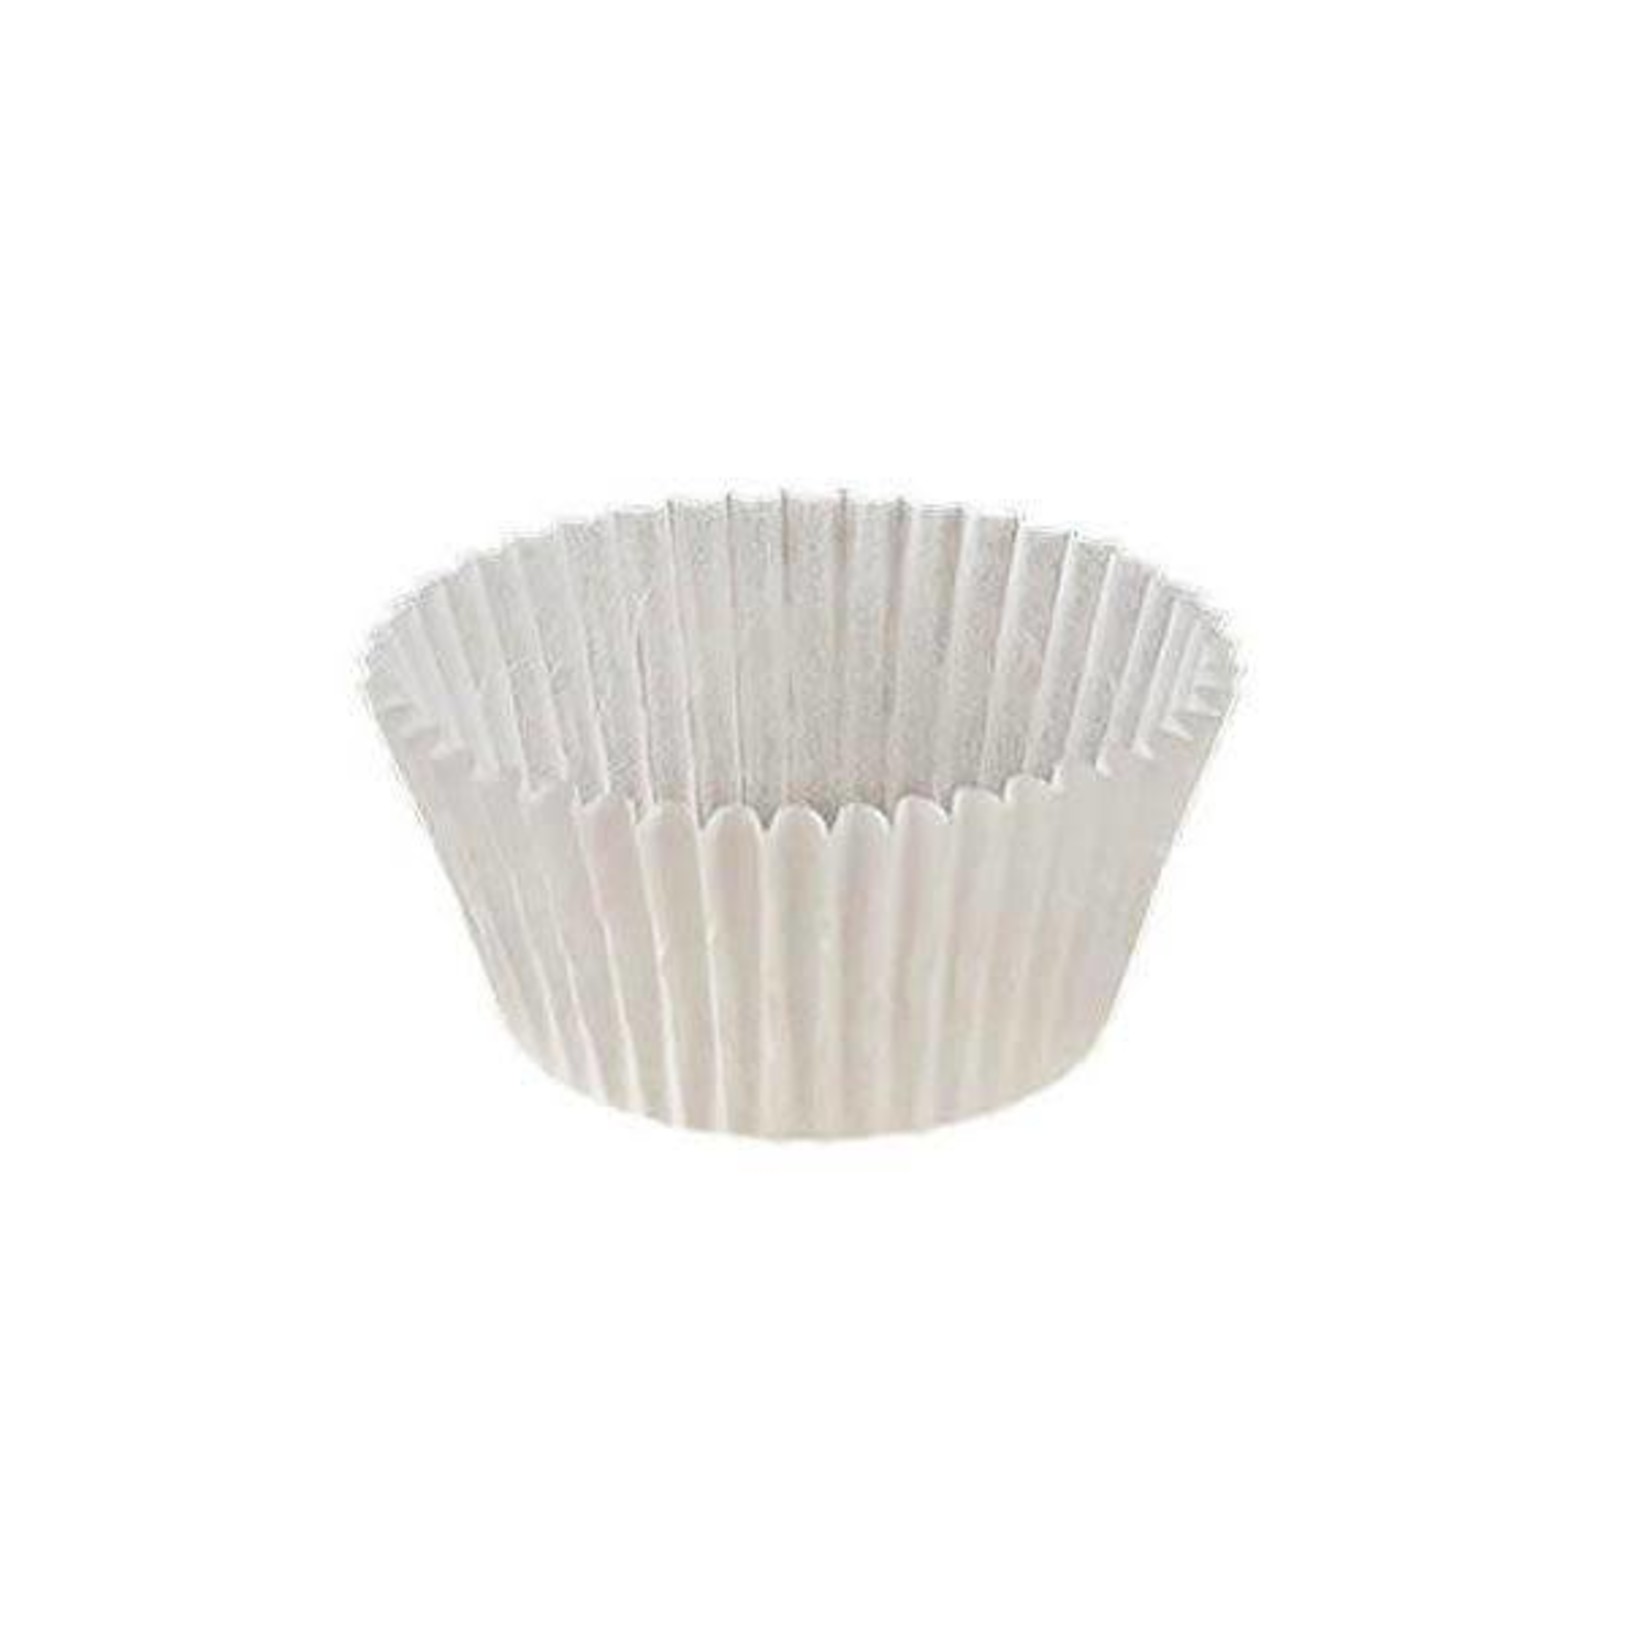 CK White Candy Cup #4 - 1 lb bag (5000ct)